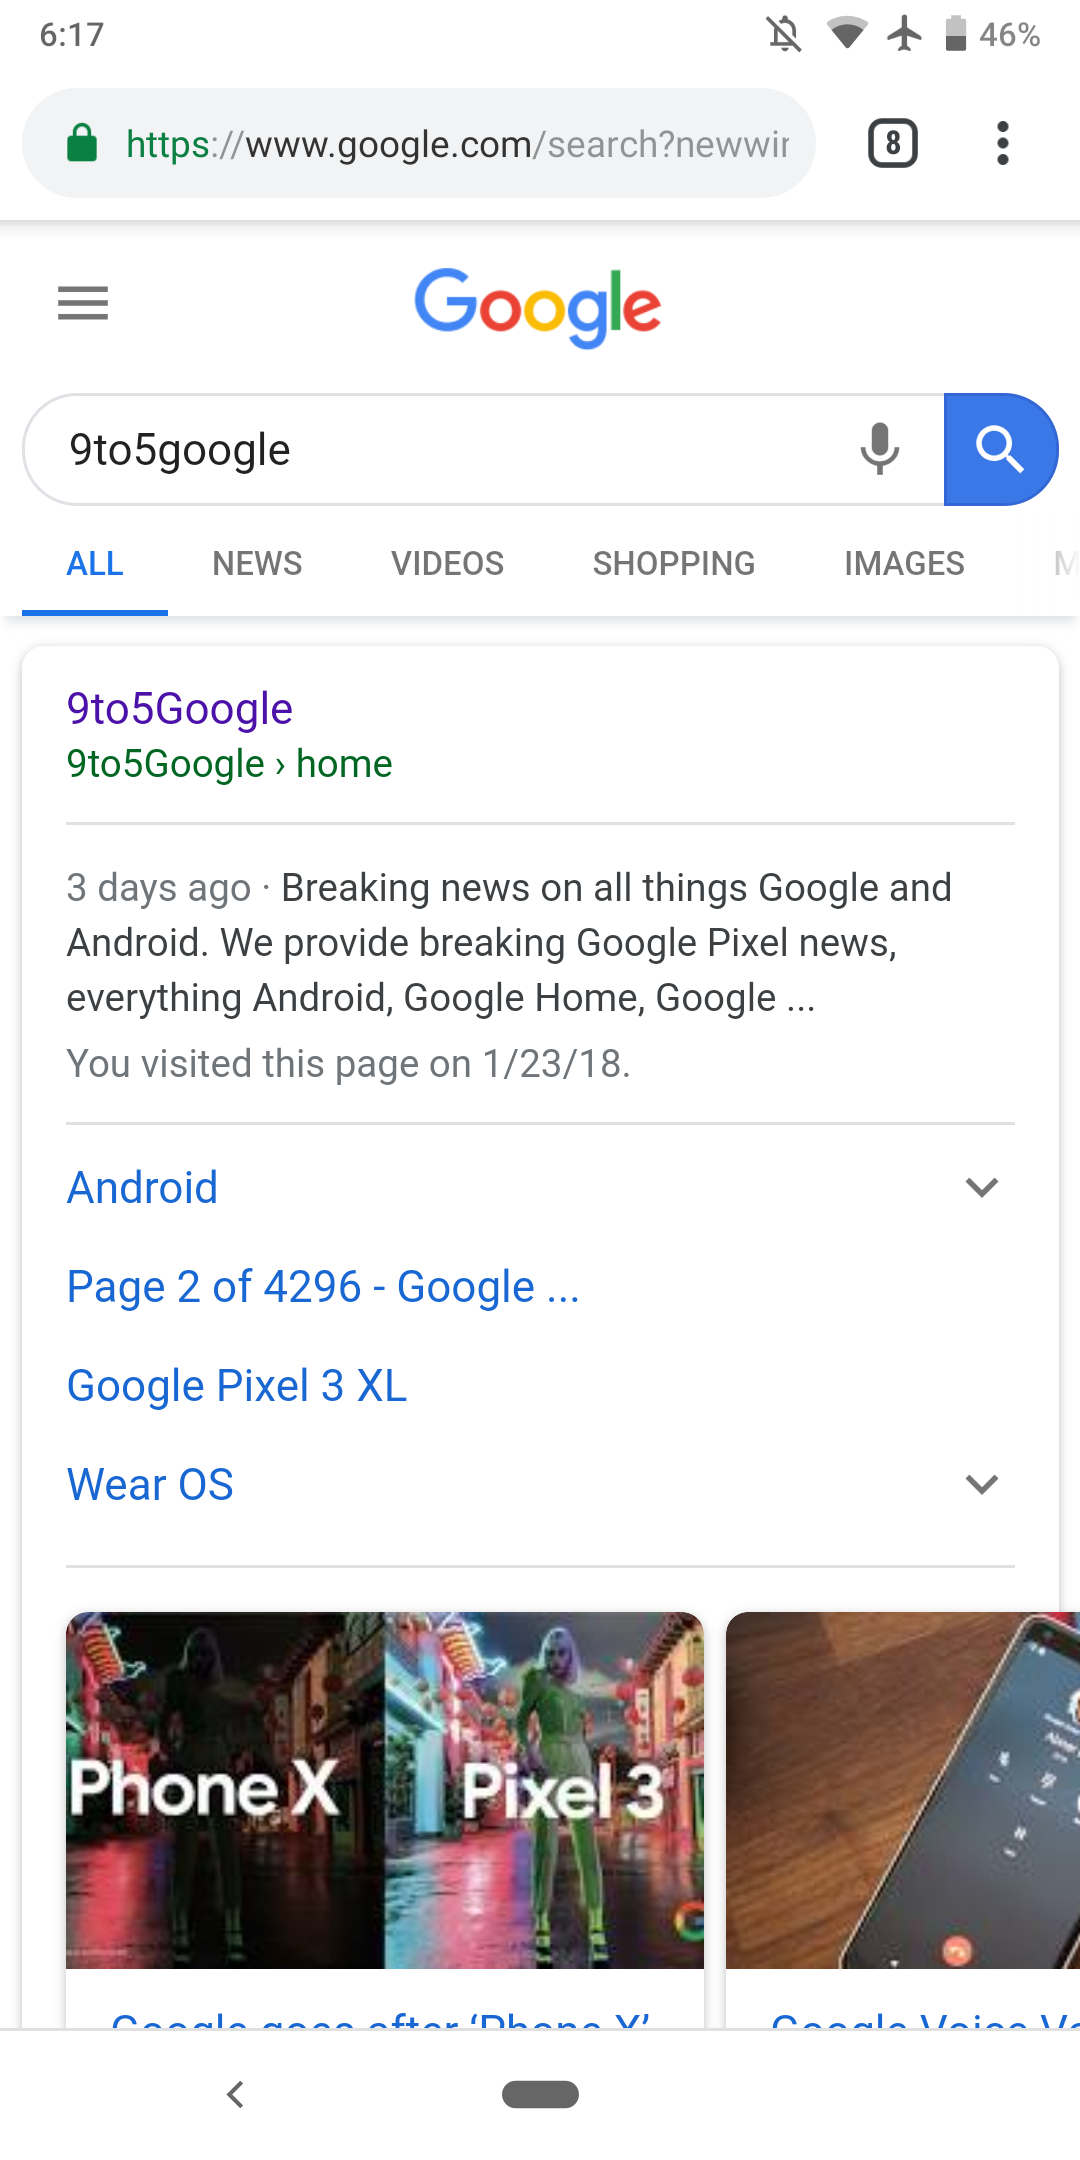 Google.com on mobile web rolling out voice search in Chrome for Android